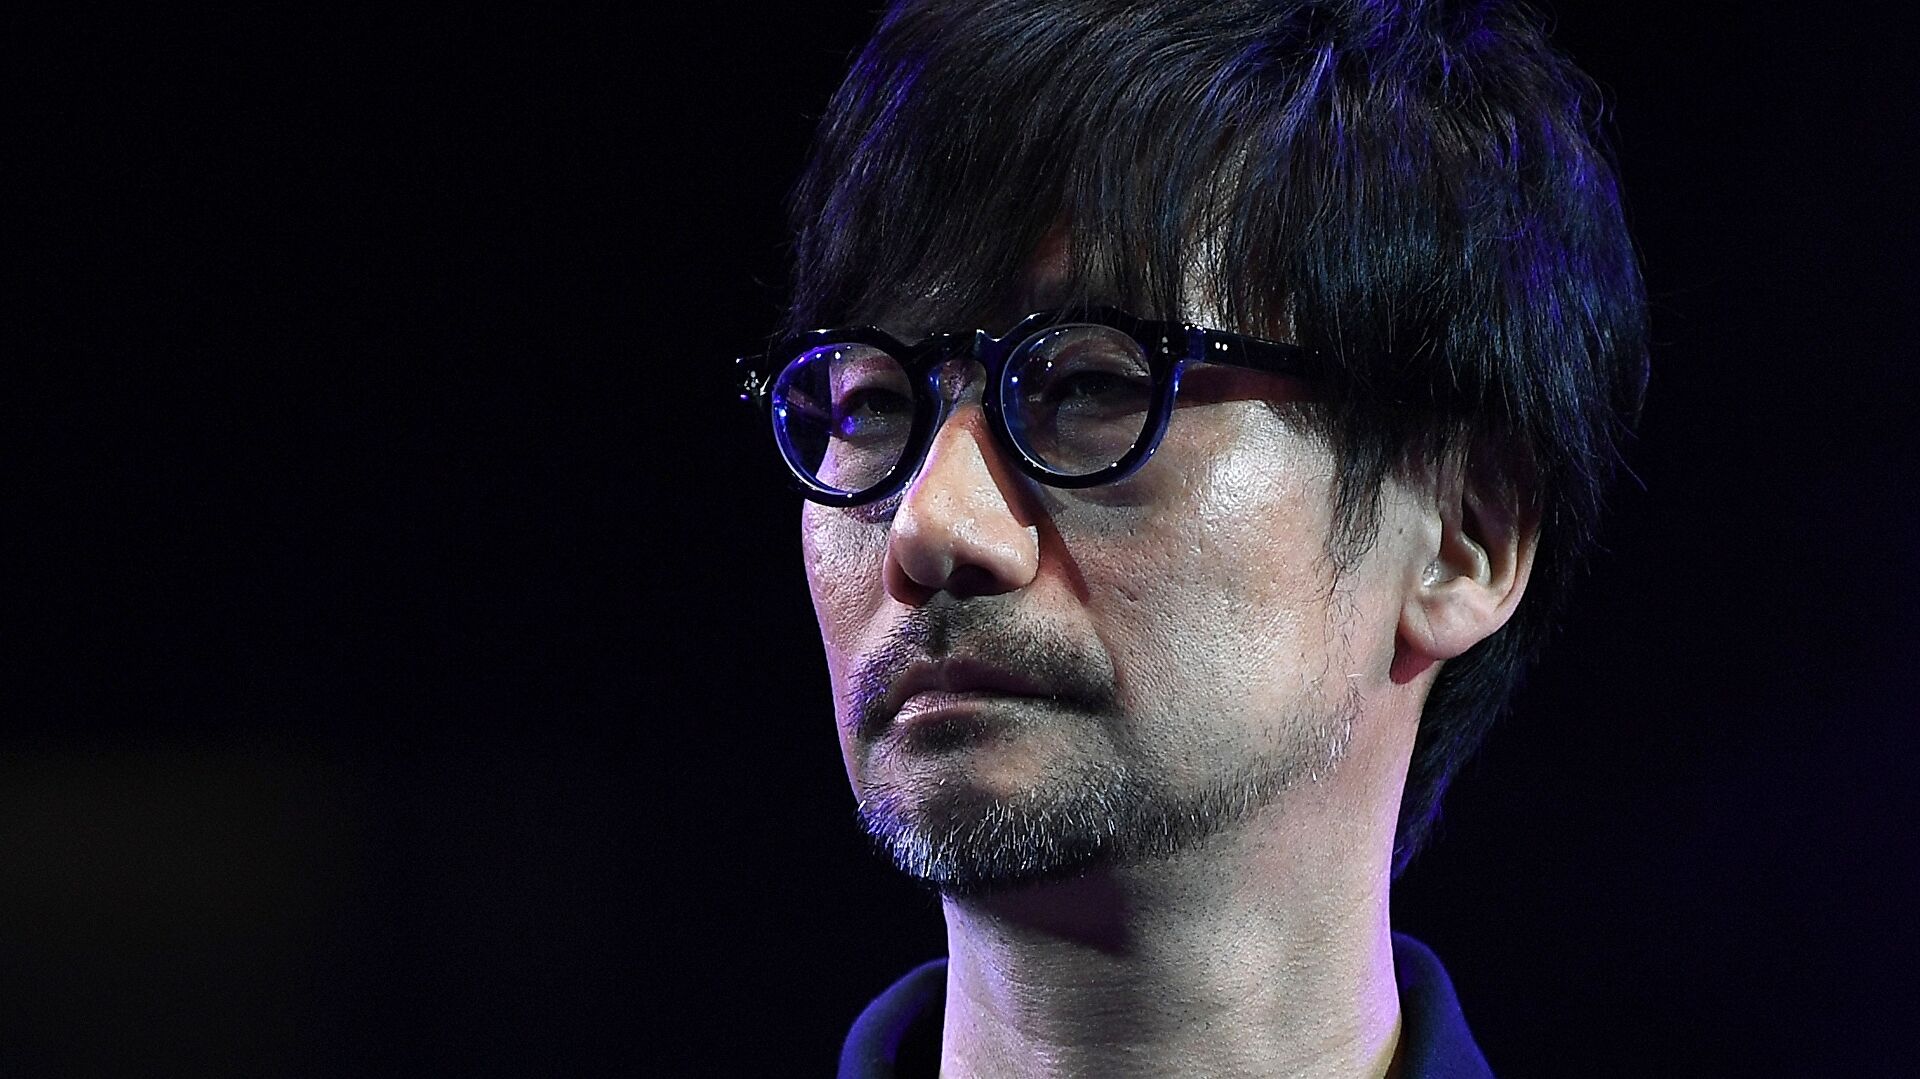 Image for Hideo Kojima dismisses Abandoned game rumours as "nuisance"